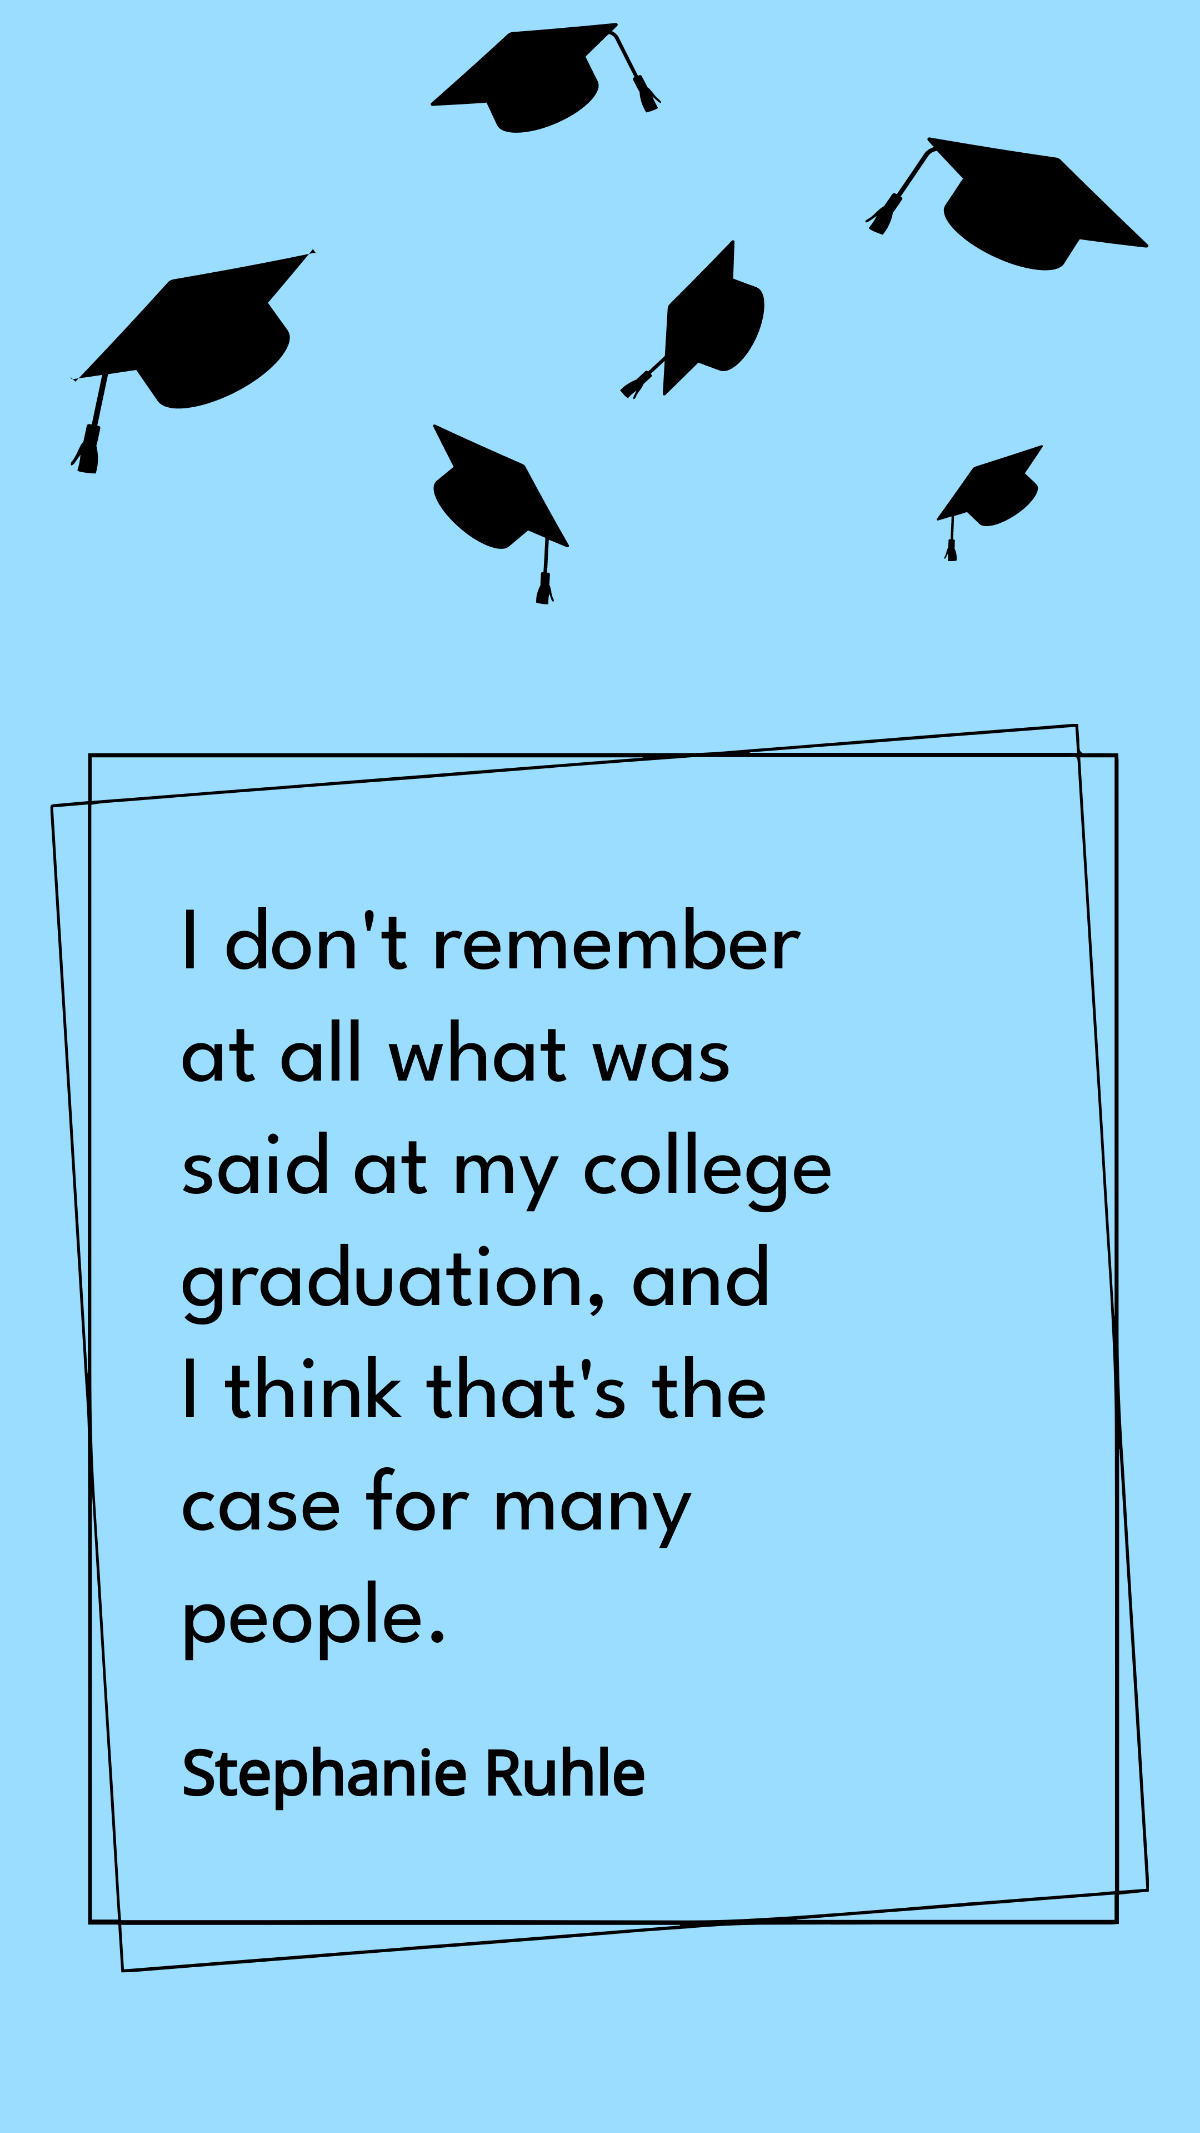 Stephanie Ruhle - I don't remember at all what was said at my college graduation, and I think that's the case for many people. Template